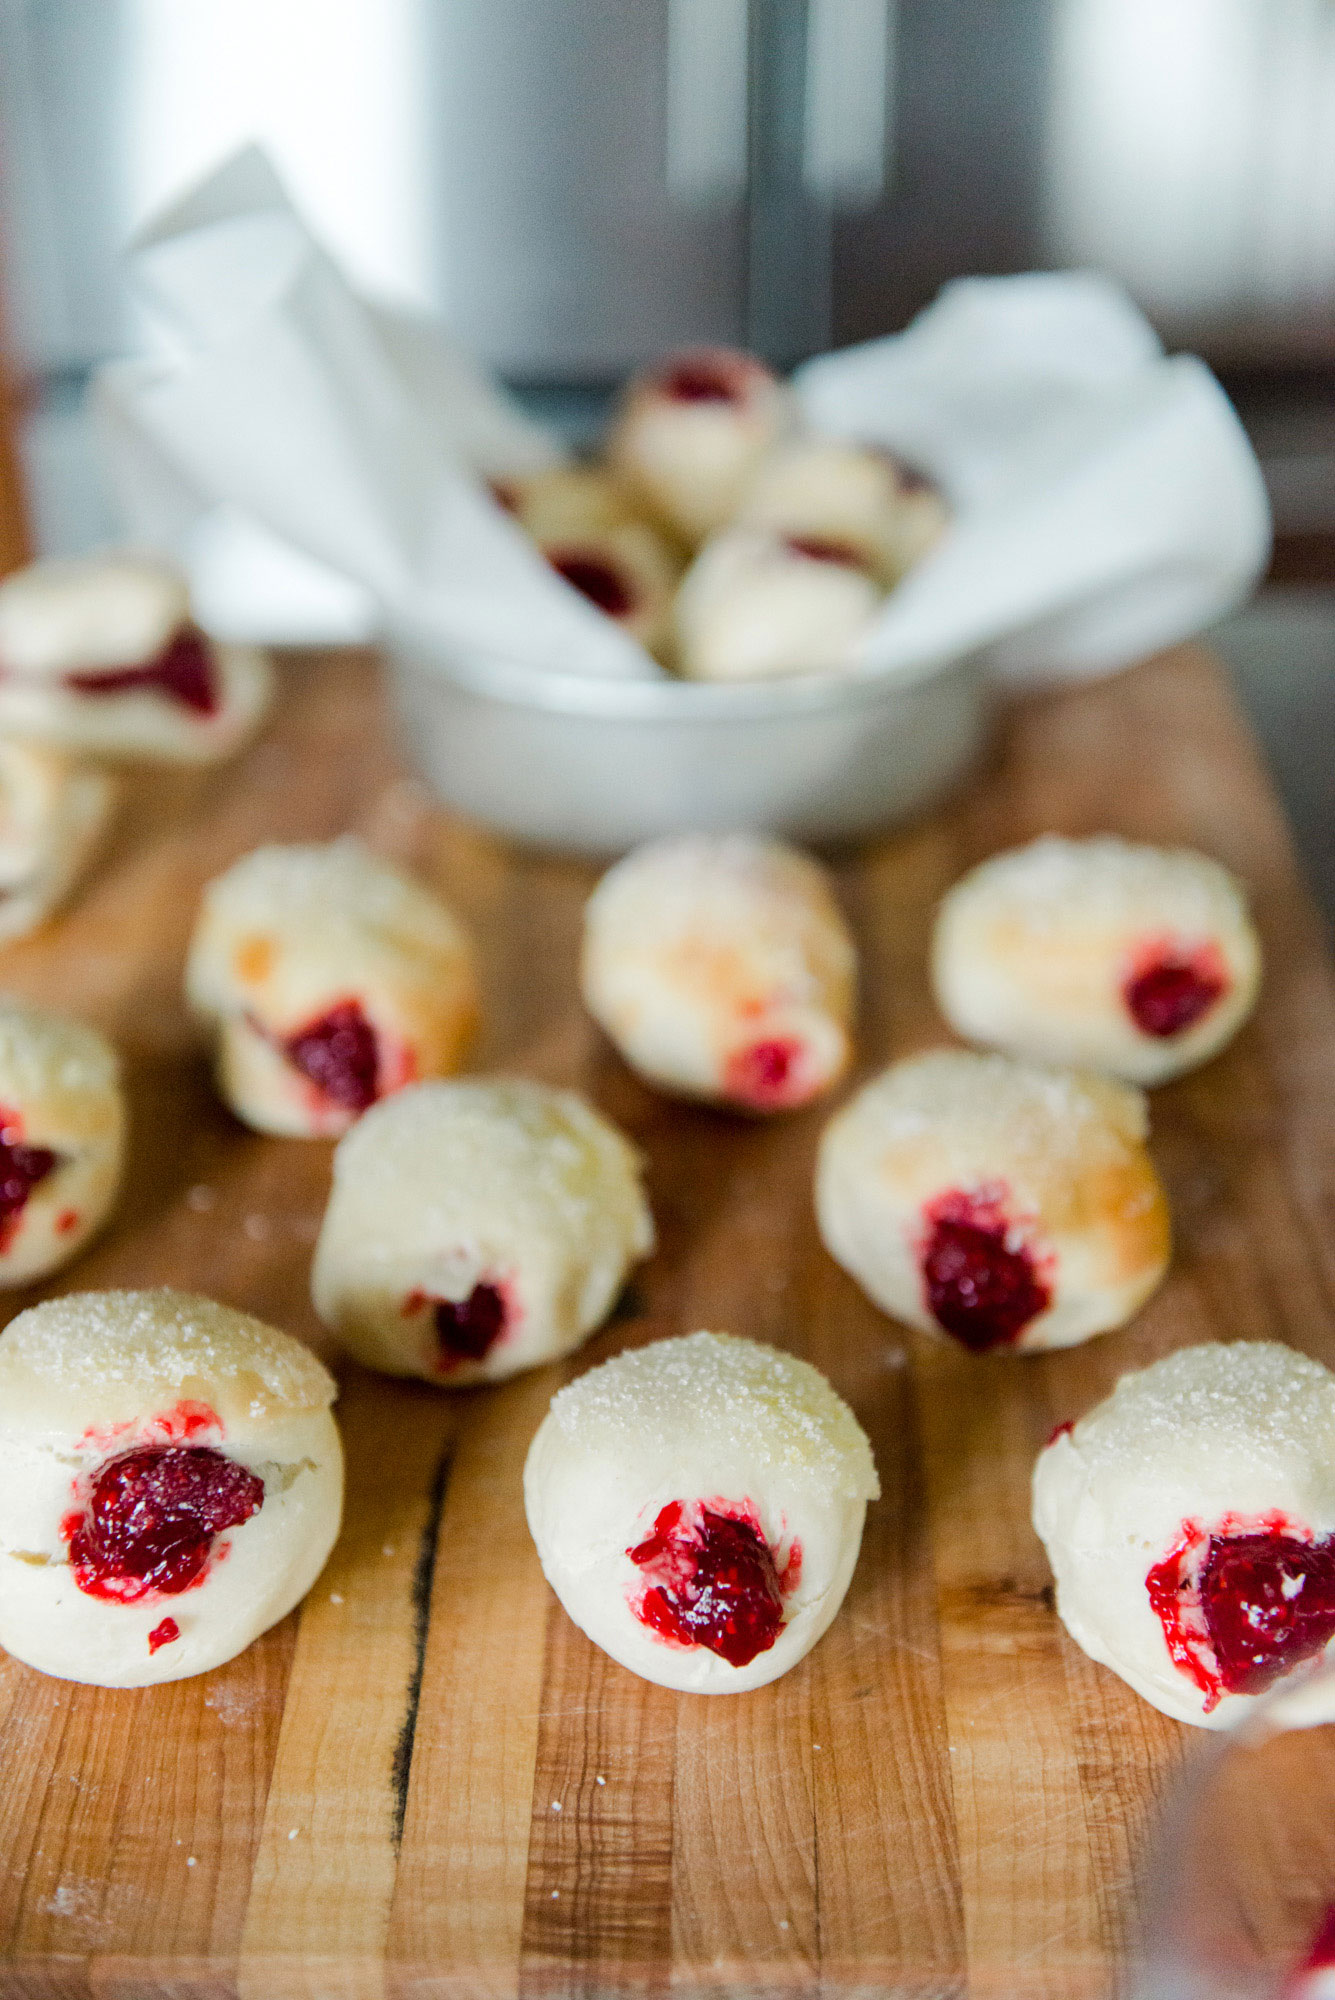 Raspberry filled air fryer donuts with lemon sugar topping